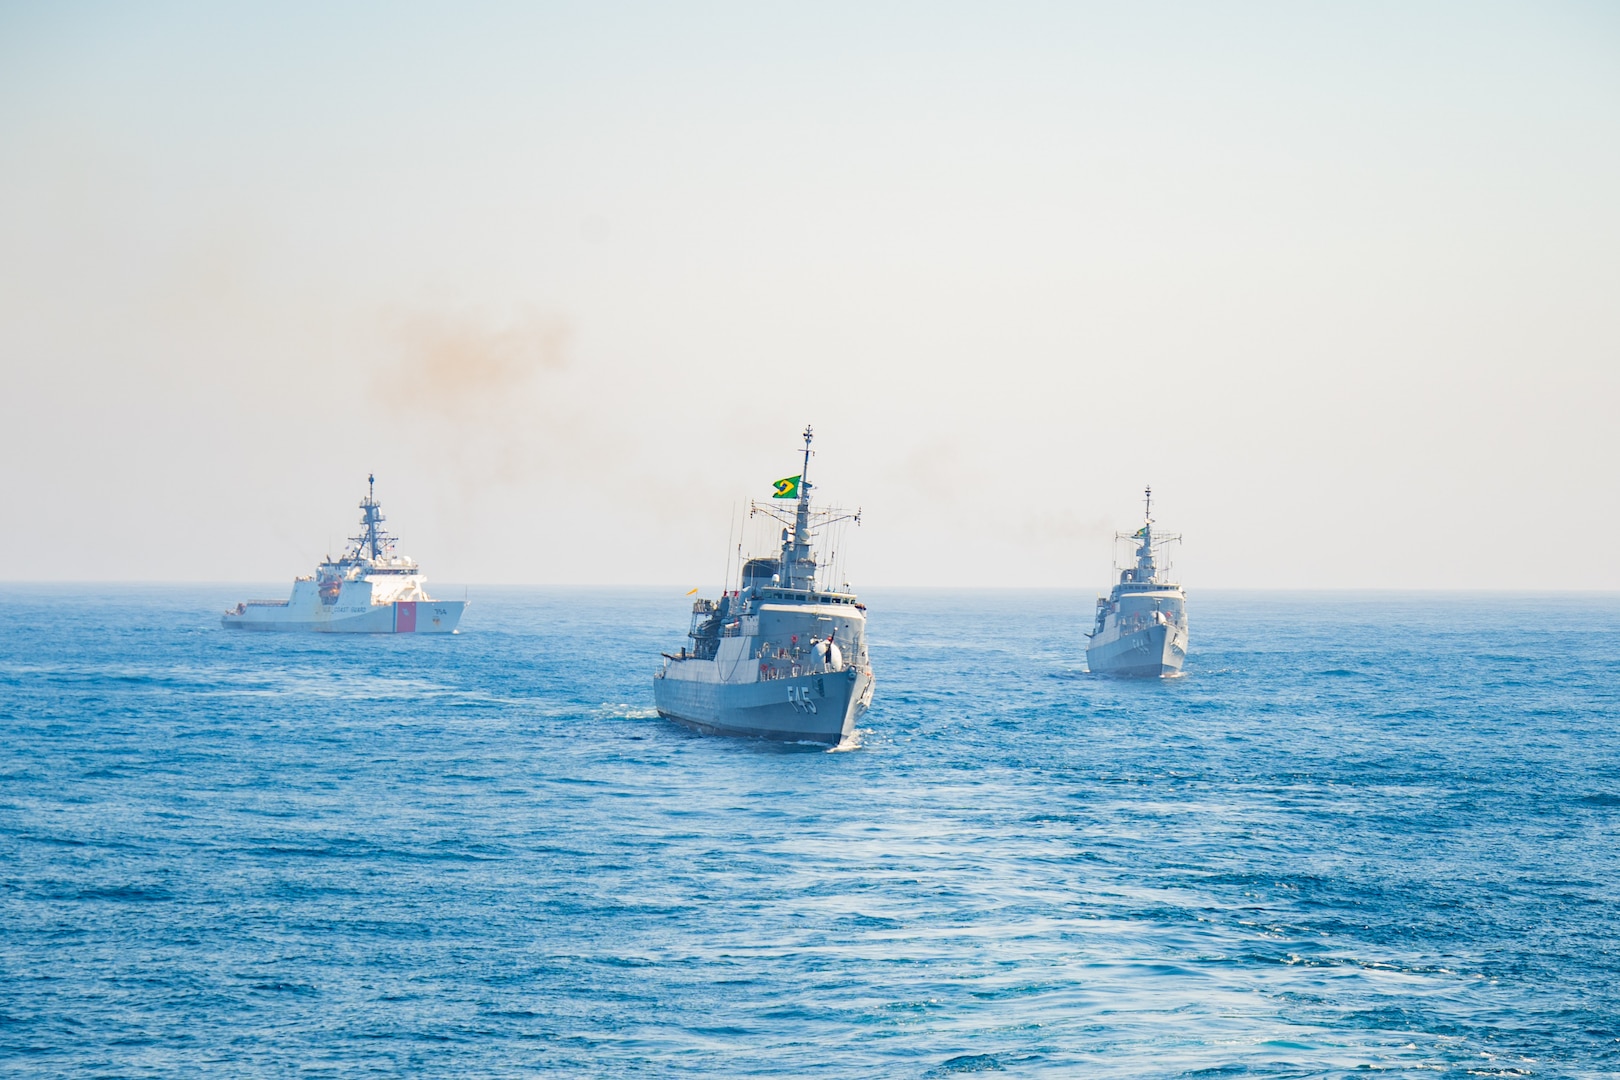 Legend-class cutter USCGC James (WSML 754), left, and Brazilian navy Niterói-class frigates União (F 45) and Independência (F 44) operate in formation with Arleigh Burke-class guided-missile destroyer USS Porter (DDG 78) as part of a bilateral exercise between the U.S. and the Brazilian navy in the Atlantic Ocean, May 18, 2024. Porter is deployed as part of Southern Seas 2024 which seeks to enhance capability, improve interoperability, and strengthen maritime partnerships with countries throughout the U.S. Southern Command area of responsibility through joint, multinational and interagency exchanges and cooperation. (U.S. Navy photo by Mass Communication Specialist 2nd Class David C. Fines)